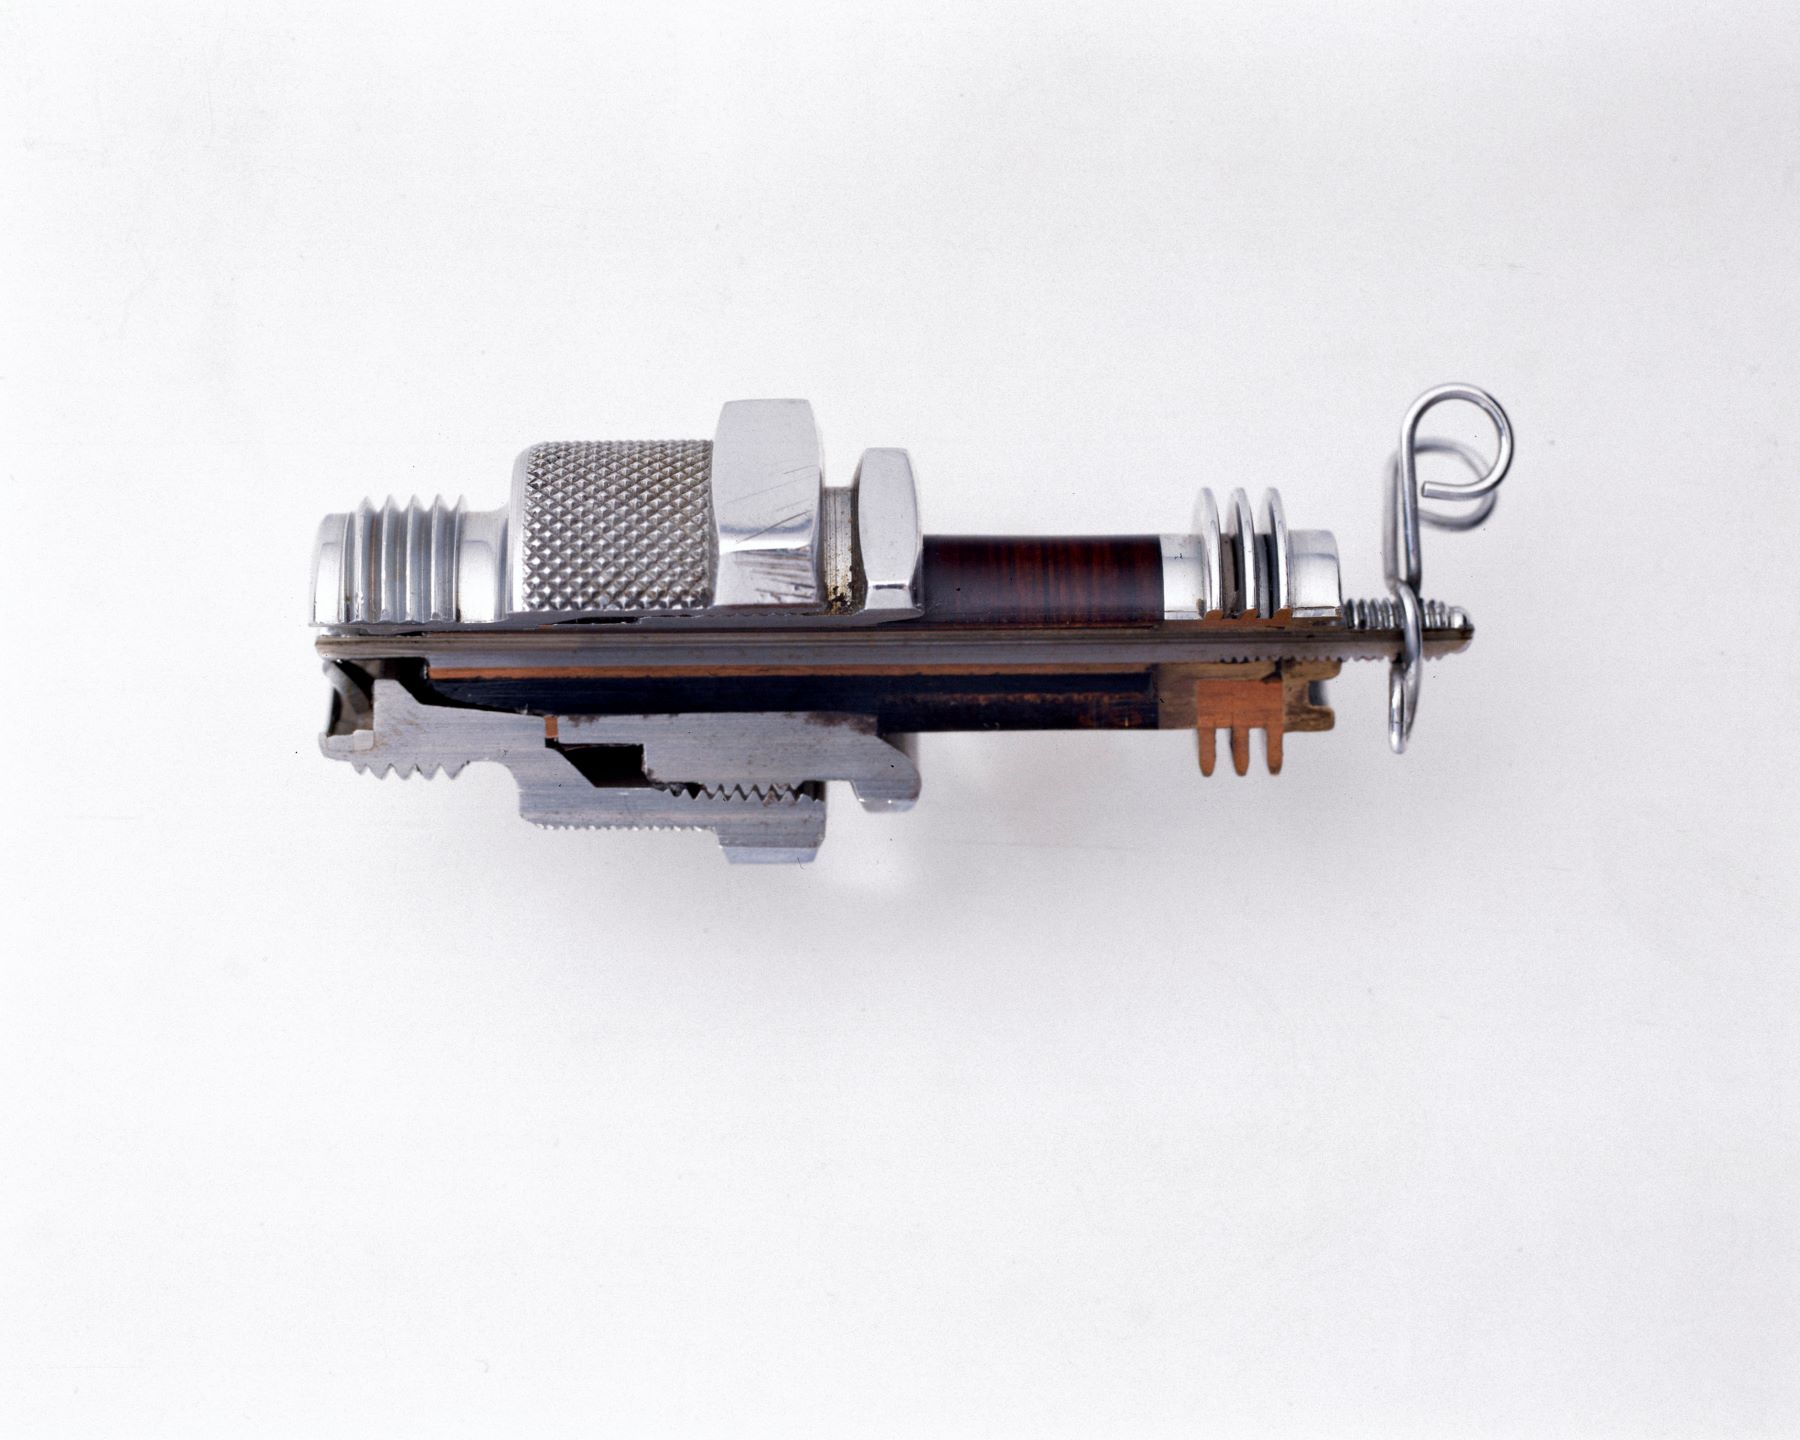 A closeup diagram of a A KLG spark plug type KSS1 from 1935